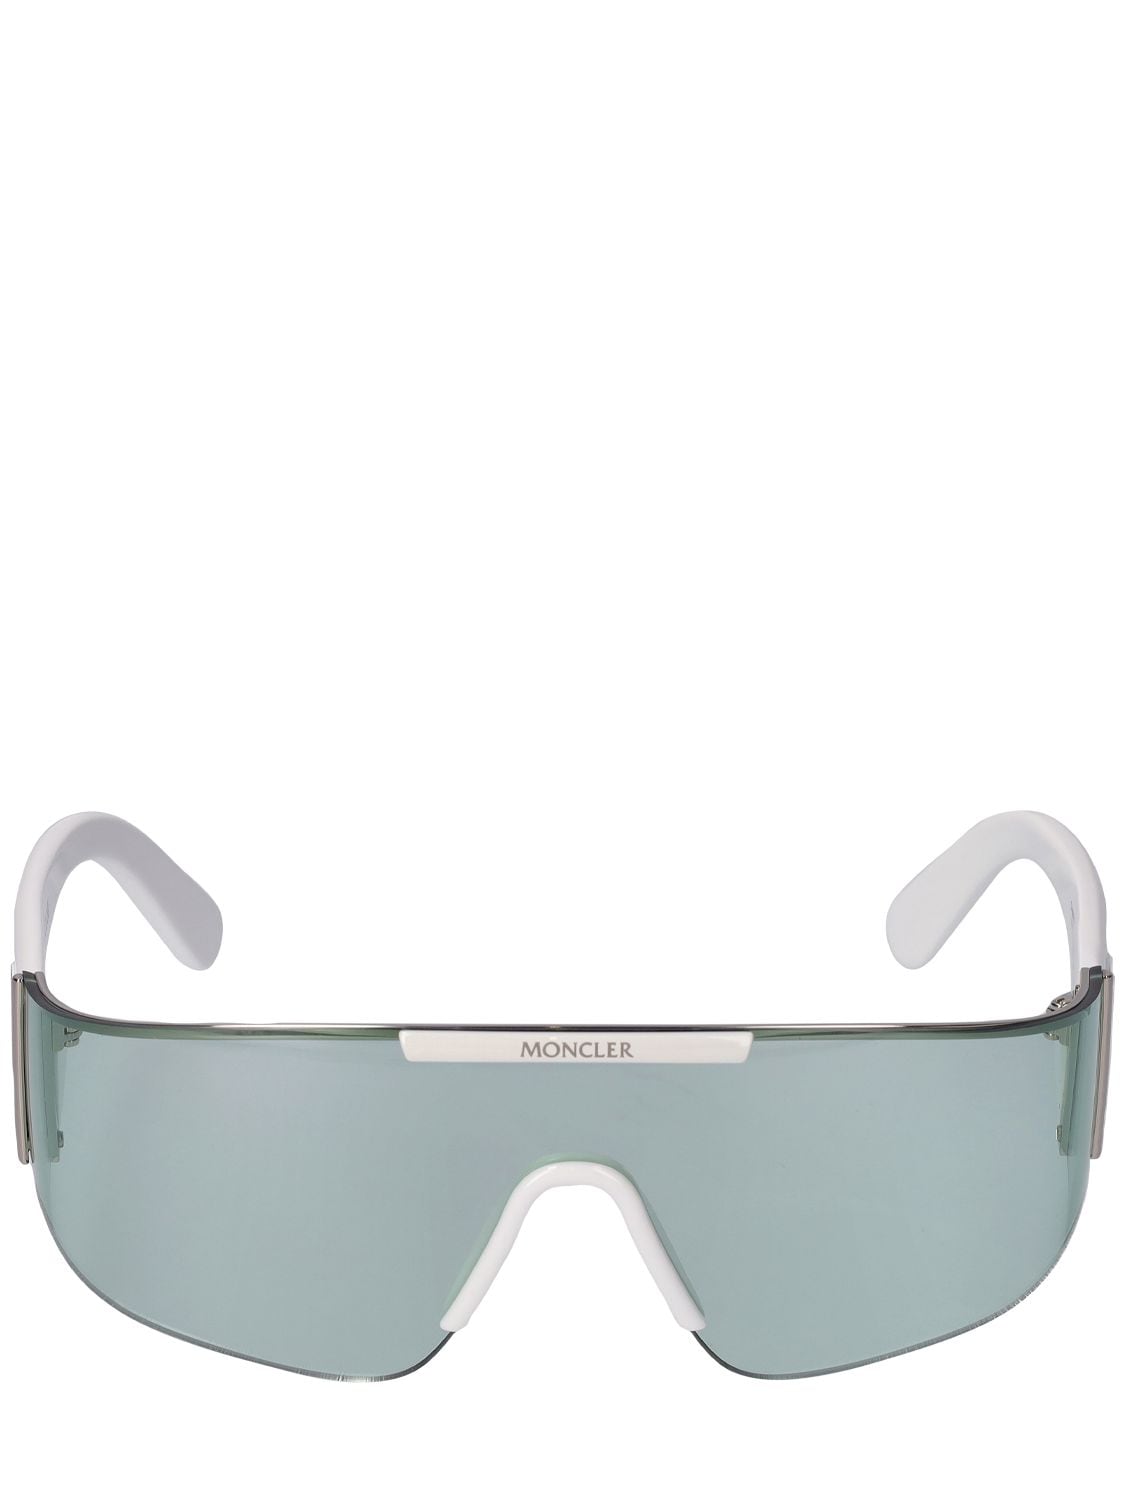 Metal Mask Ombrate | White,green Moncler ModeSens Sunglasses In